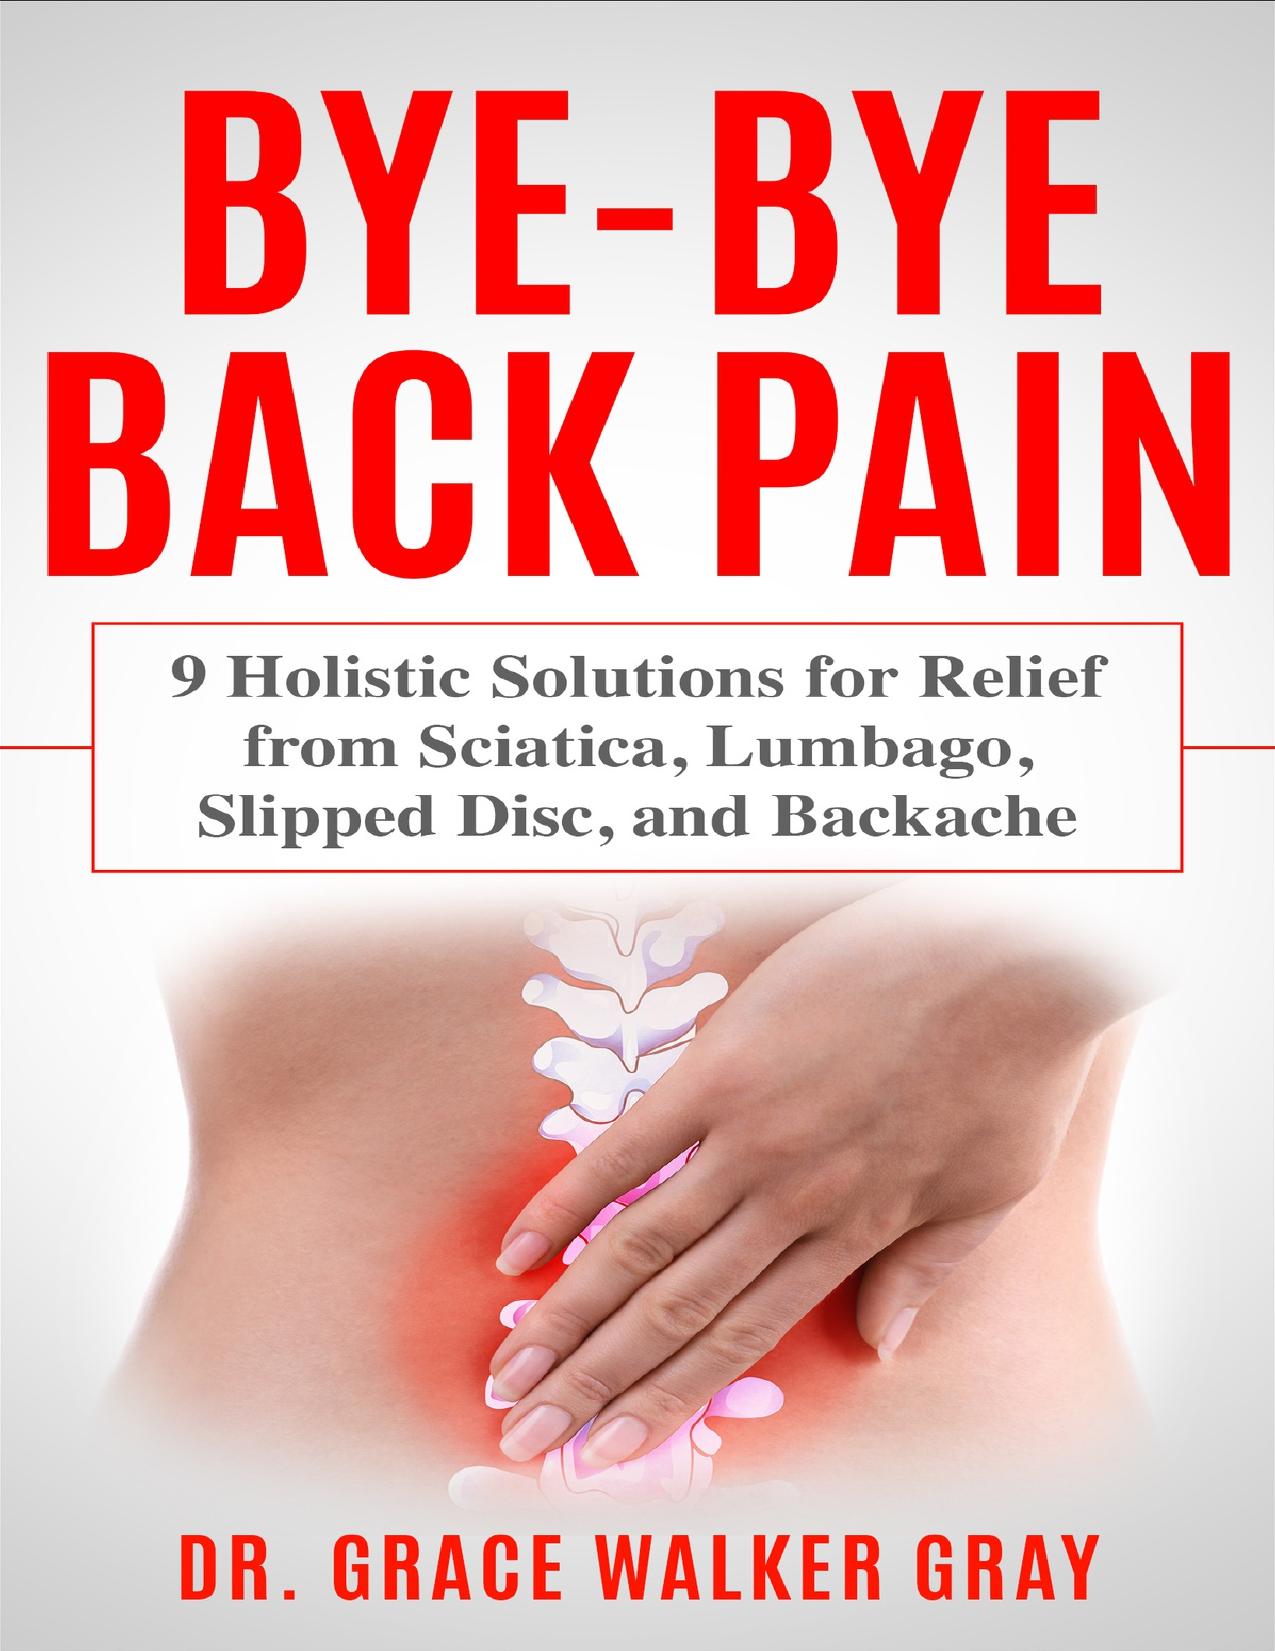 Bye-Bye Back Pain: 9 Holistic Solutions for Relief from Sciatica, Lumbago, Slipped Disc, and Backache by Walker Gray Dr. Grace